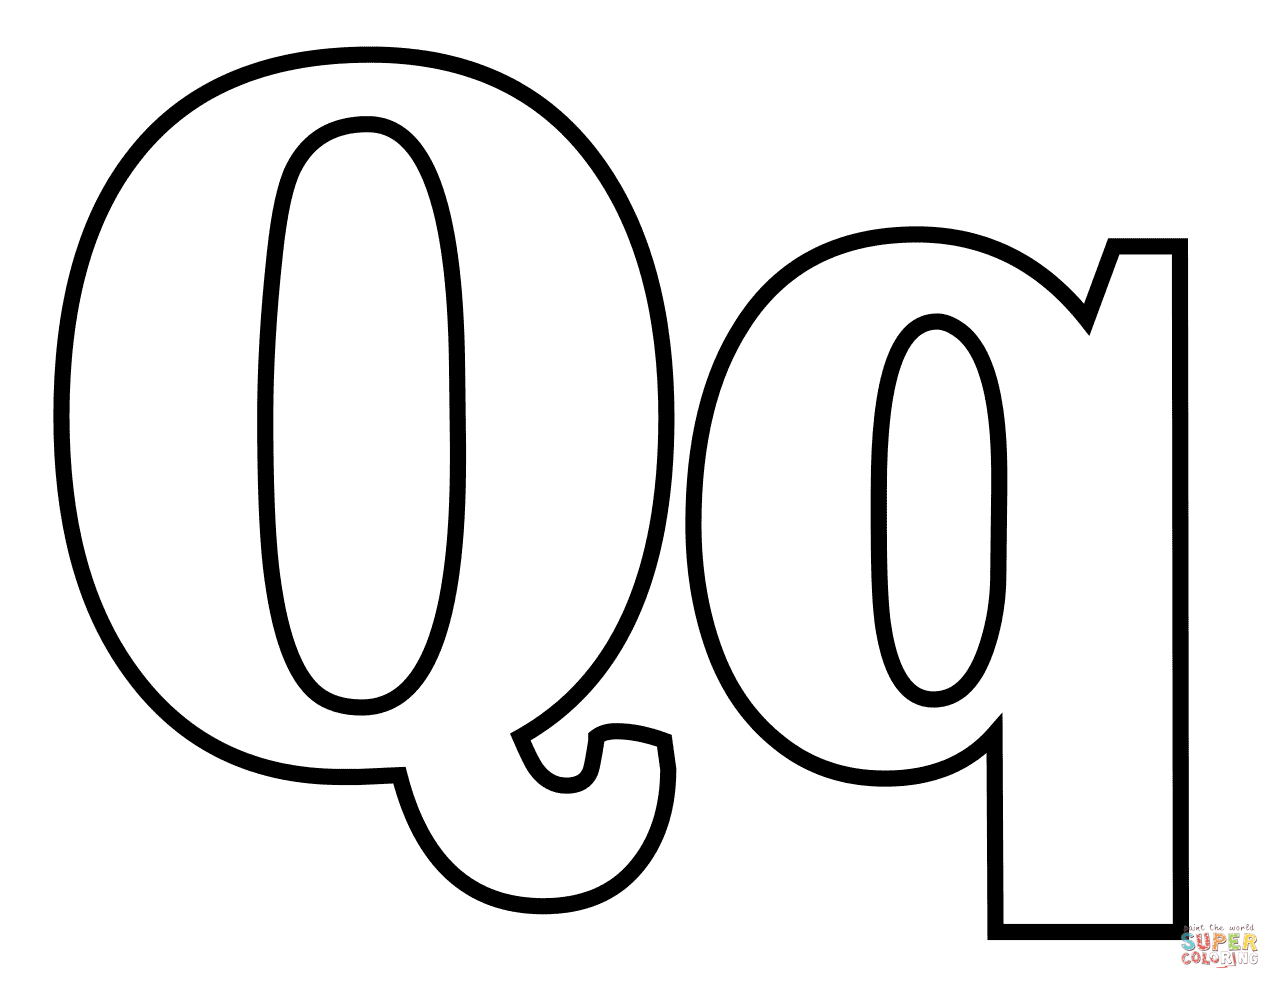 Classic Letter Q from Letter Q